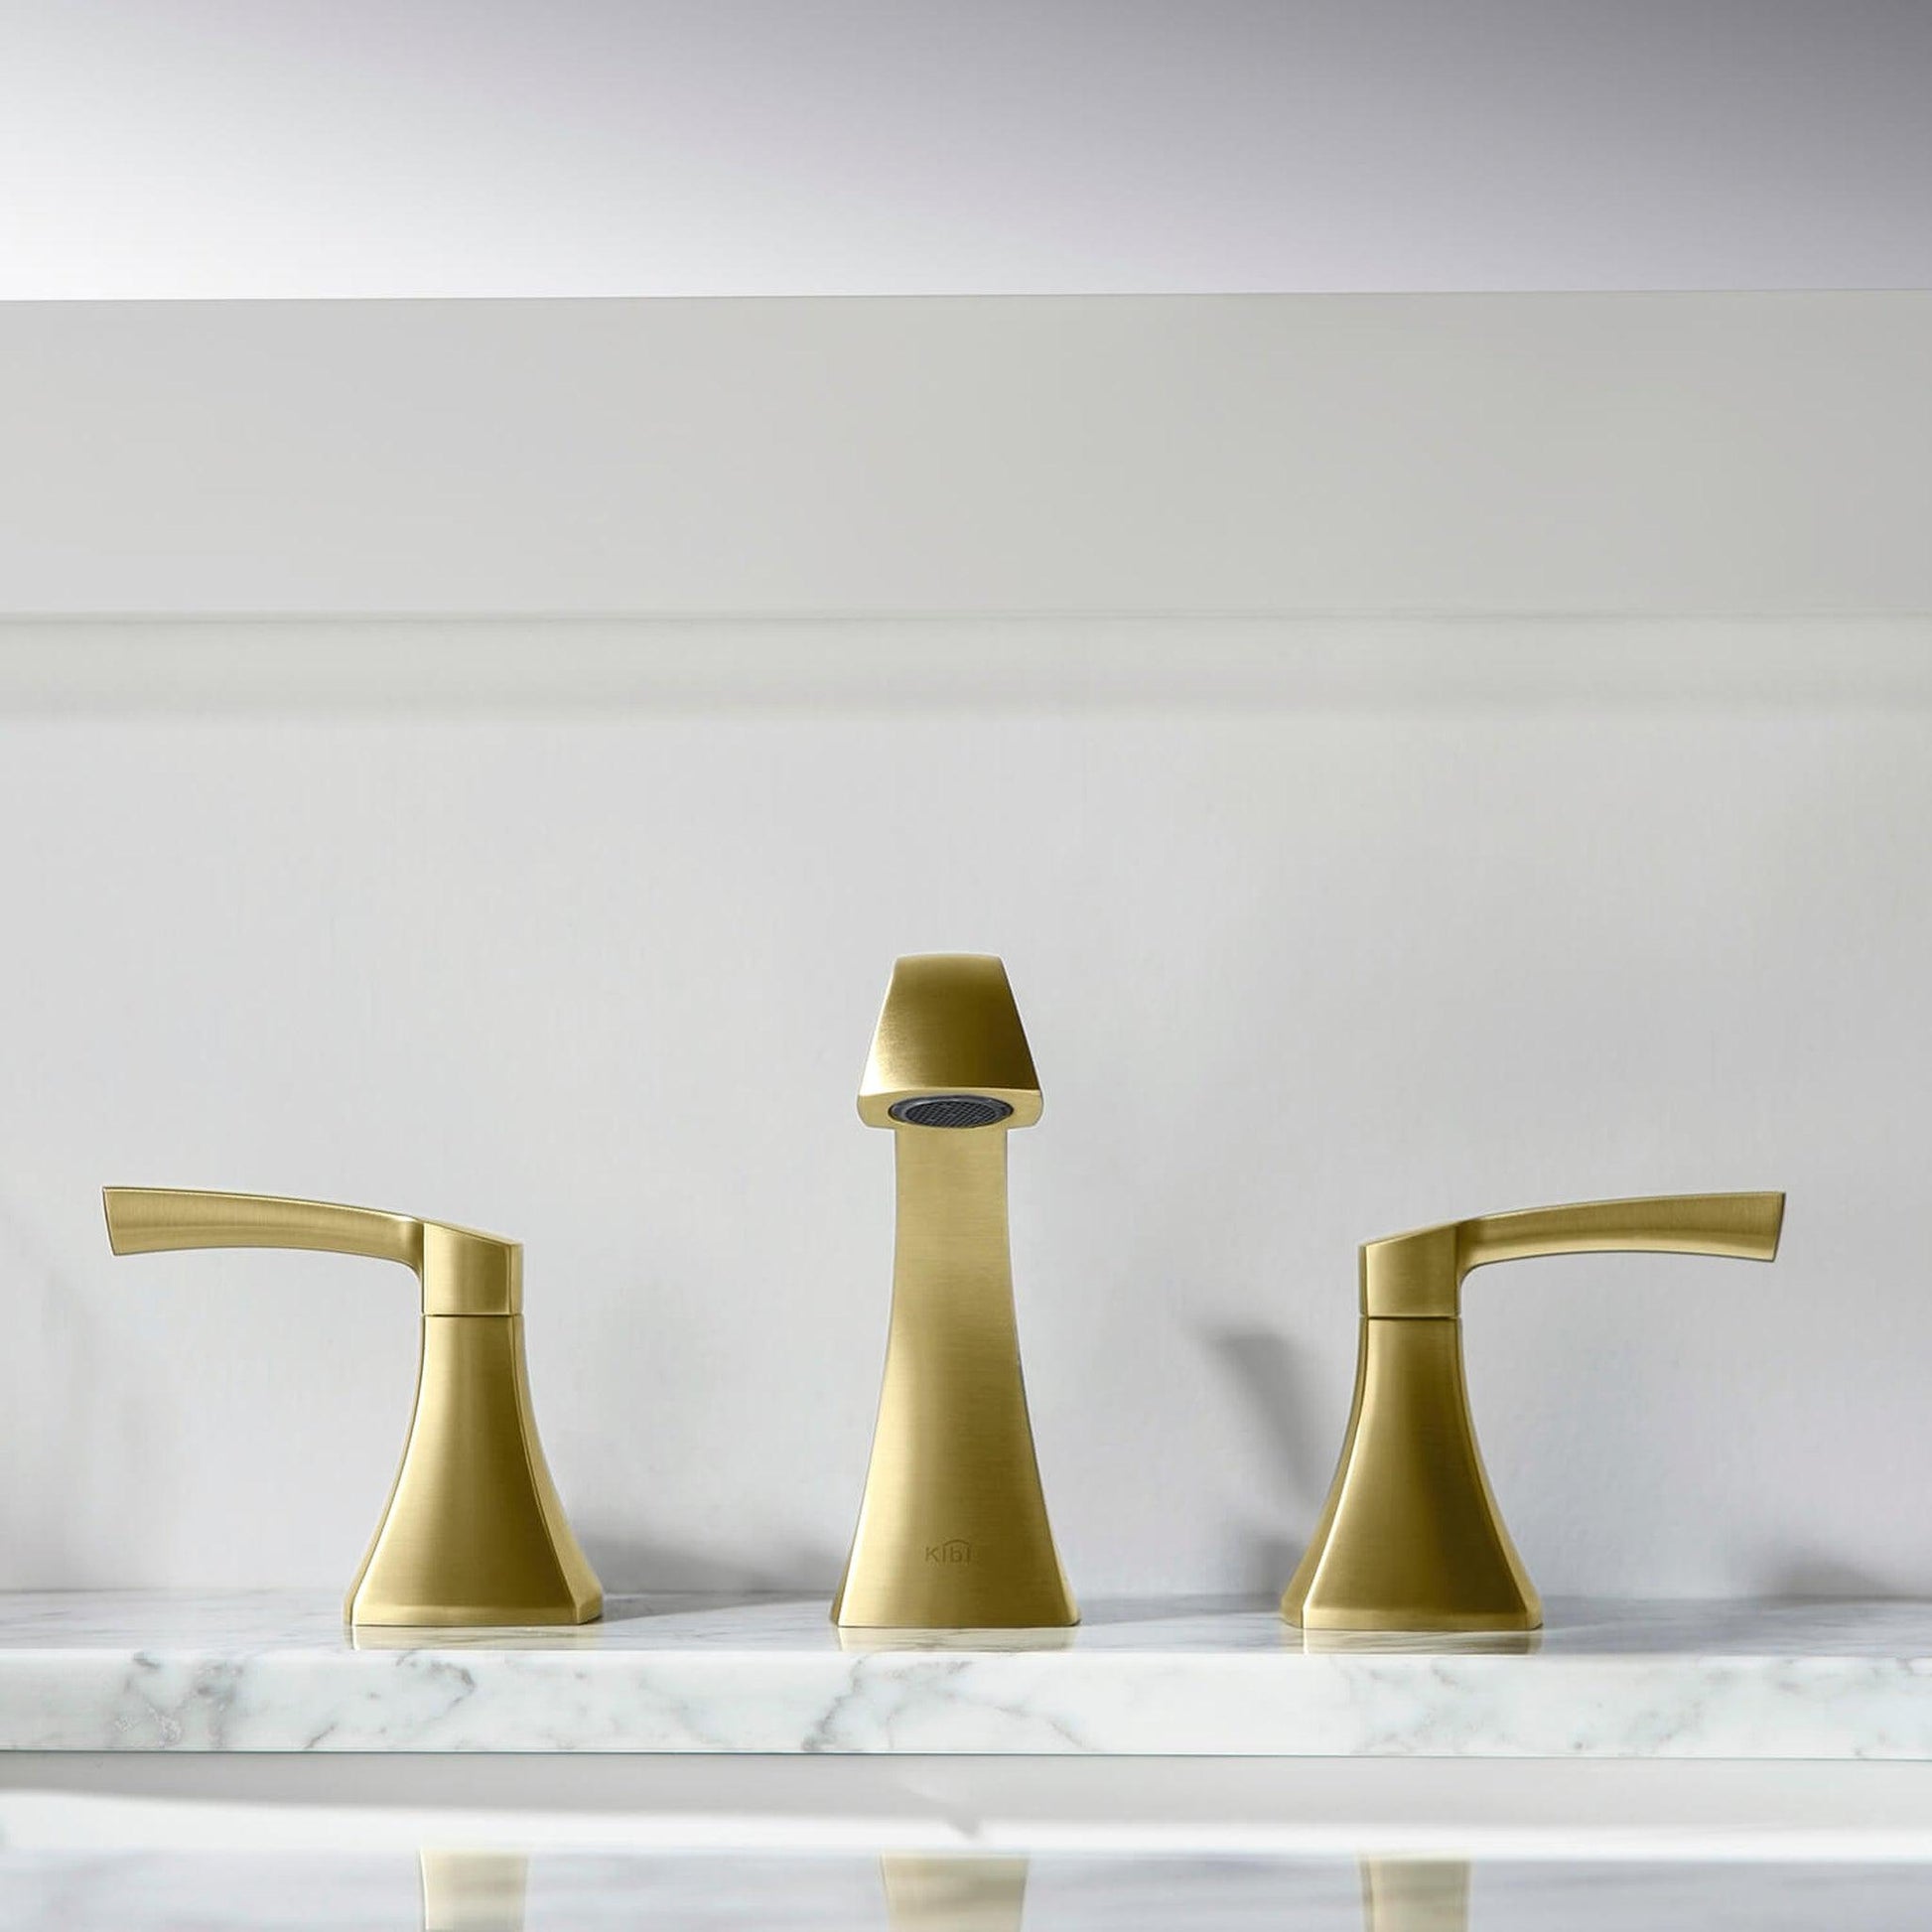 KIBI Pyramid 8" Widespread Brushed Gold Solid Brass Bathroom Sink Faucet With Pop-Up Drain Assembly